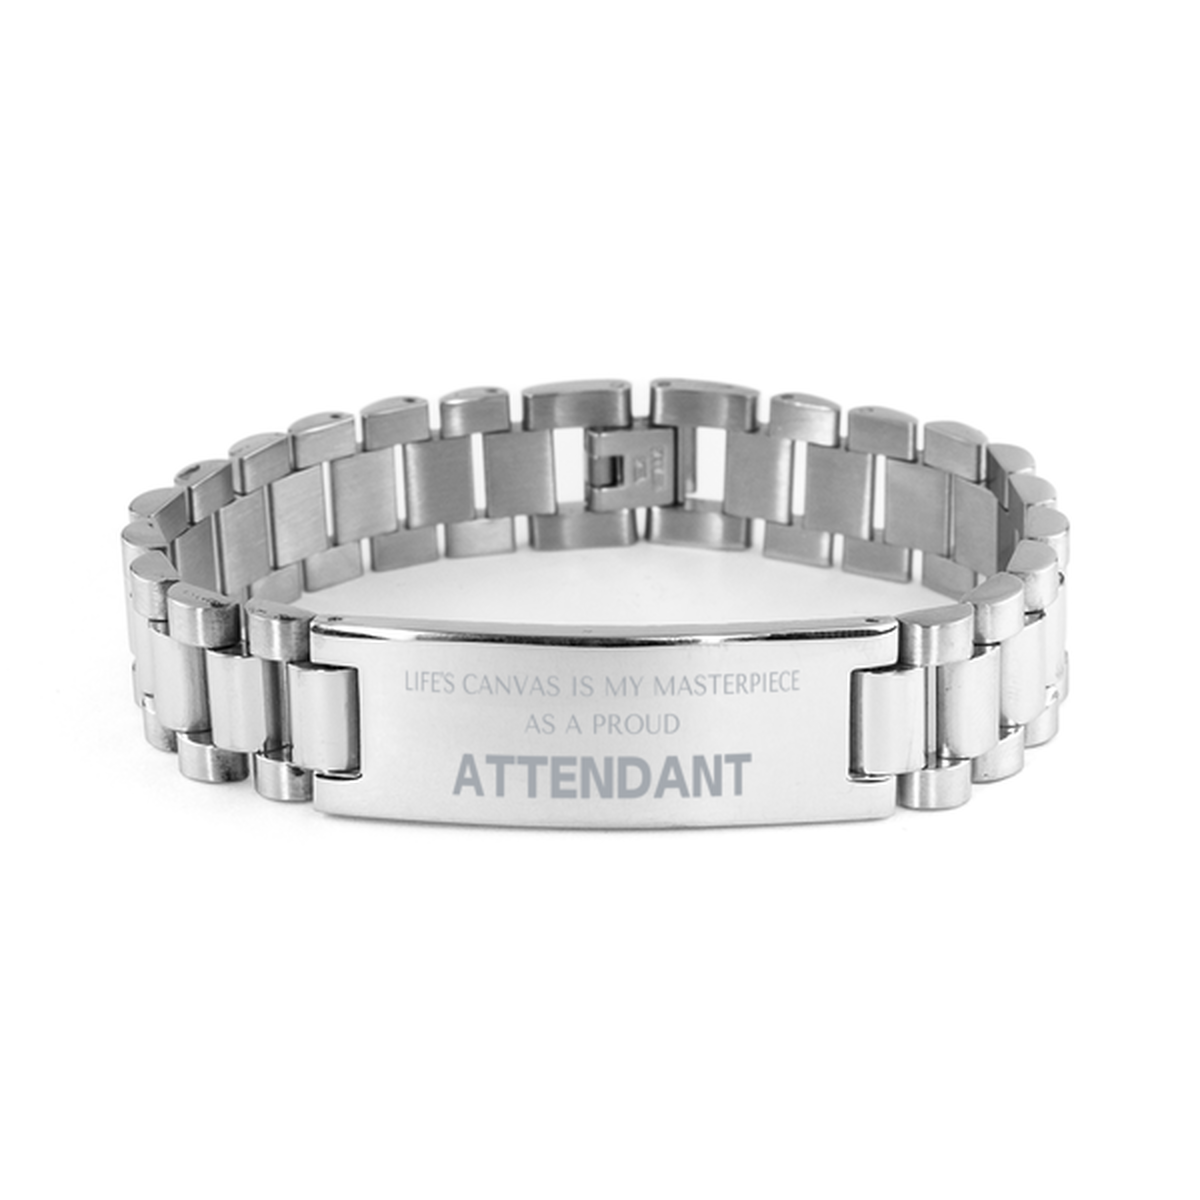 Proud Attendant Gifts, Life's canvas is my masterpiece, Epic Birthday Christmas Unique Ladder Stainless Steel Bracelet For Attendant, Coworkers, Men, Women, Friends